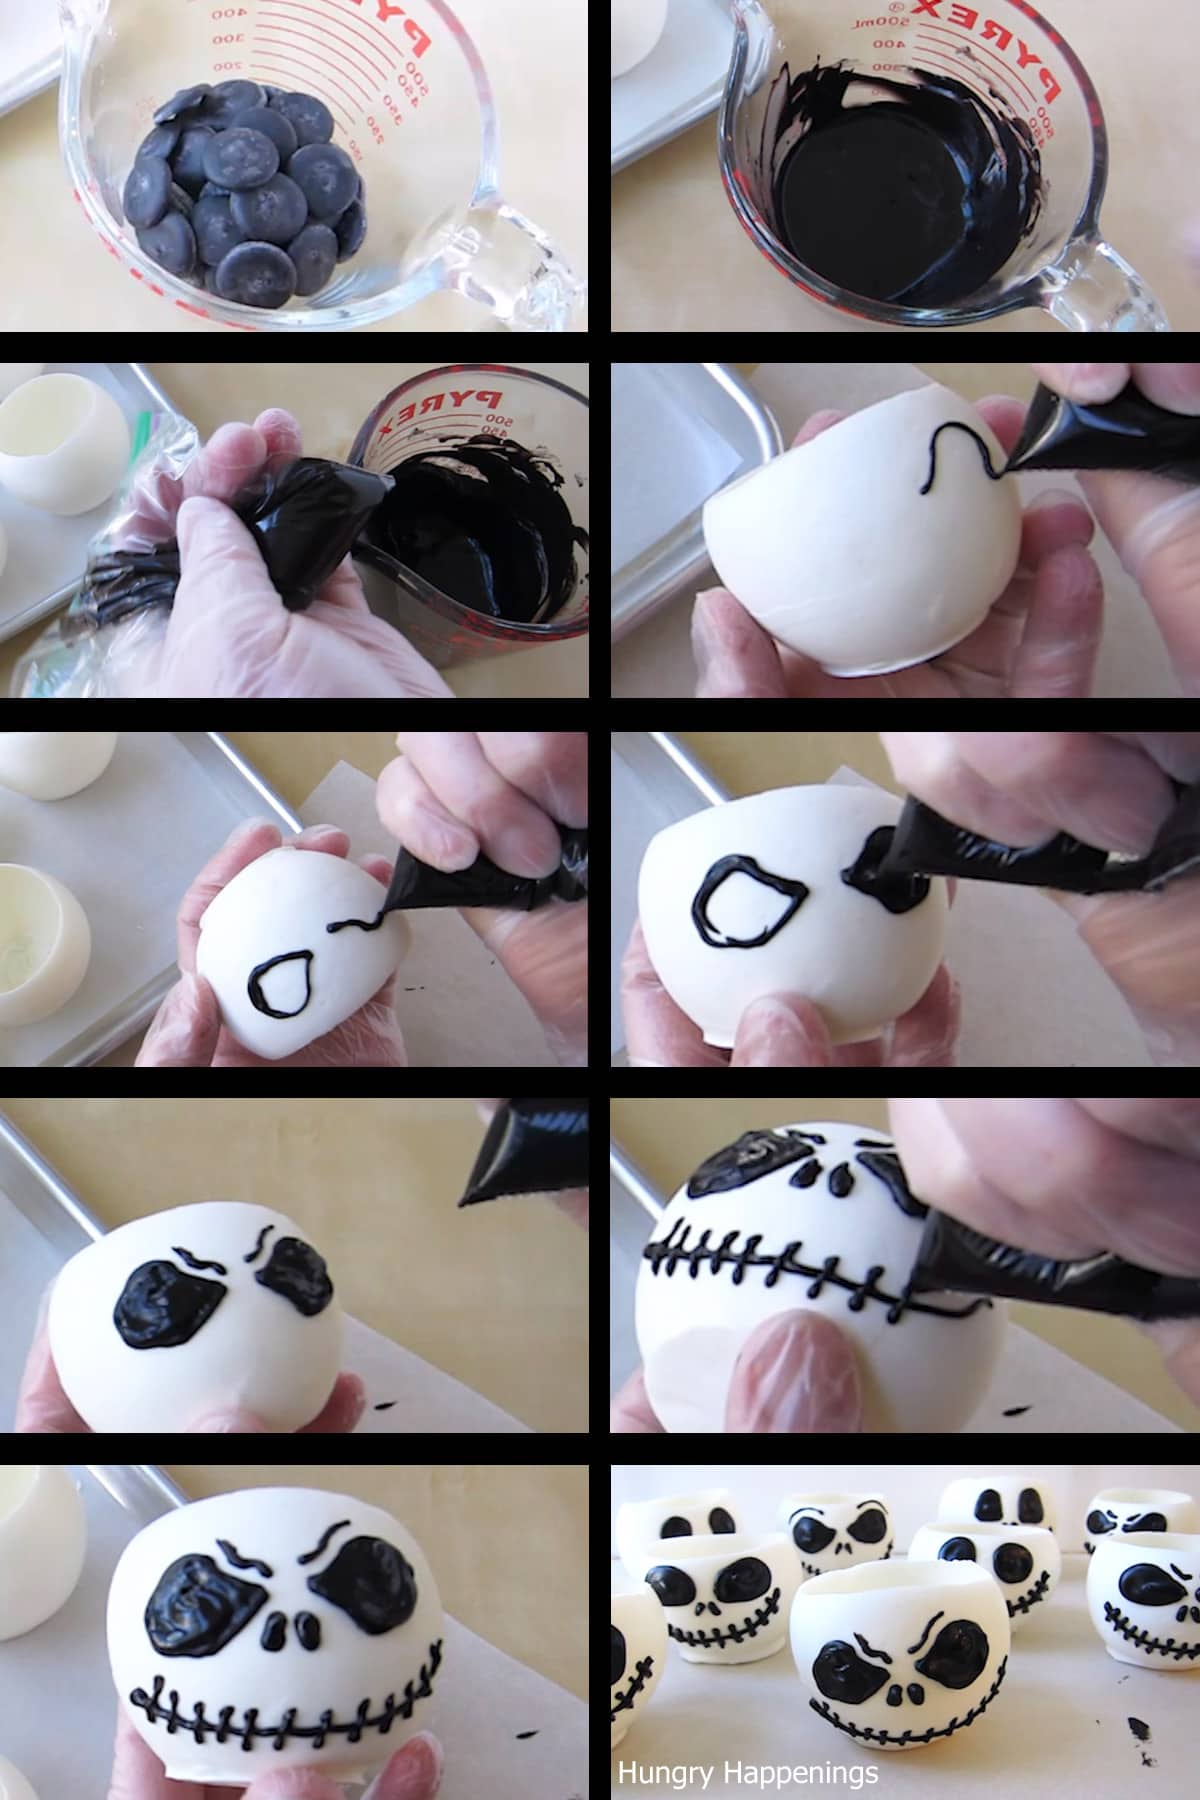 Piping Jack Skellington's face onto white chocolate bowls using black candy melts. 